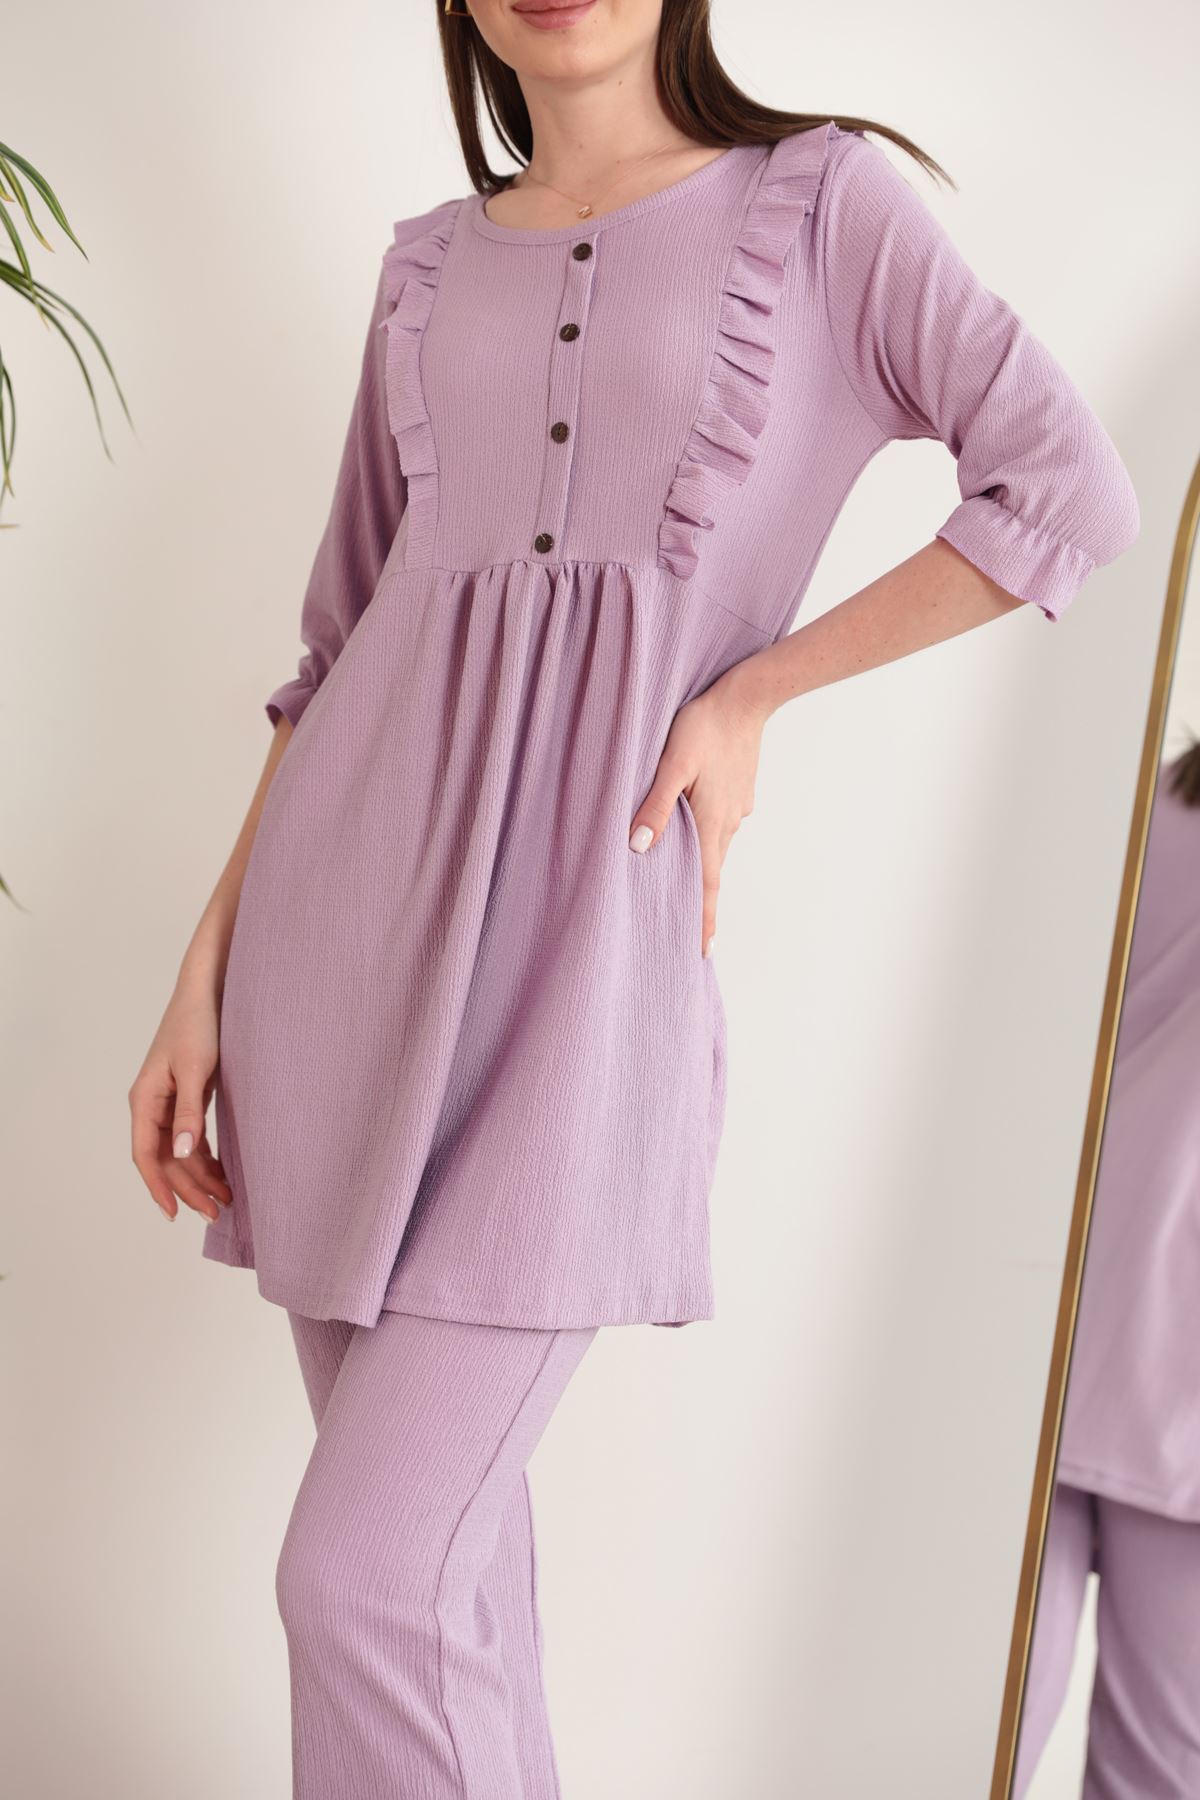 Cress Fabric Frilly Women's Suit-Lilac